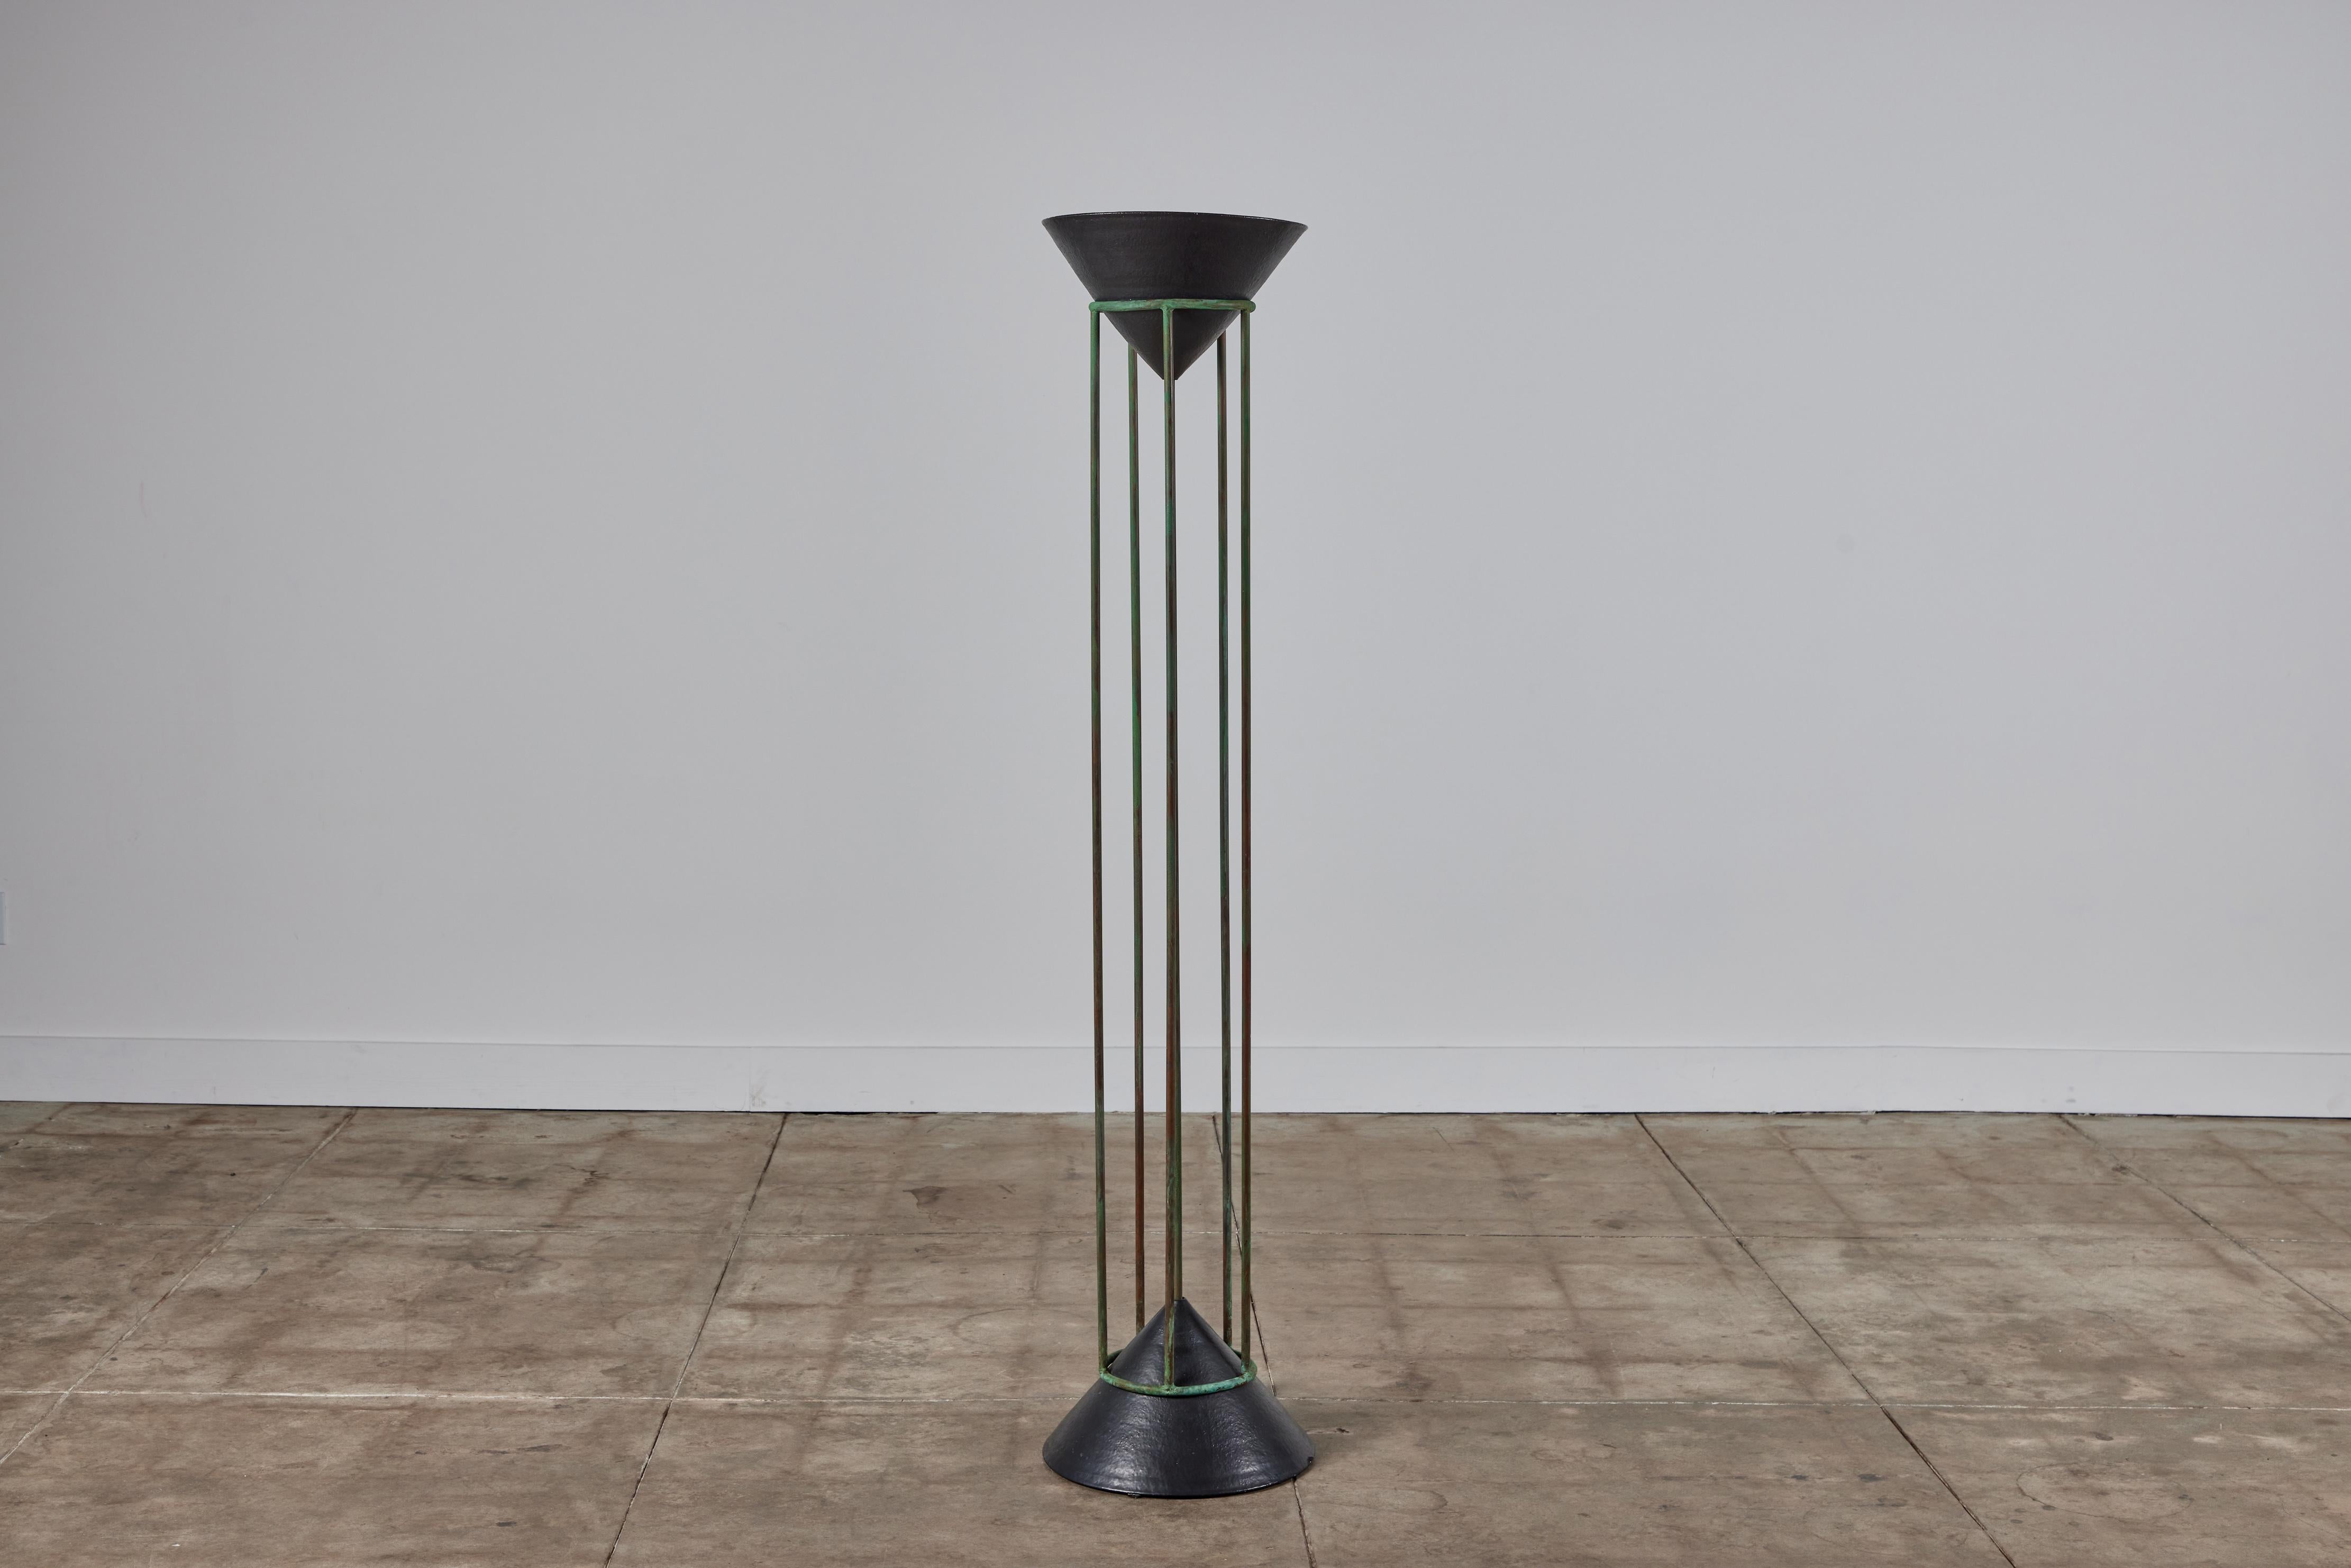 Postmodern copper and ceramic floor lamp, c.1987, USA. This lamp features a black glazed ceramic cone base as well as a ceramic shade with up lighting. The frame of the lamp is patinated copper tubing mimicking the style of Walter